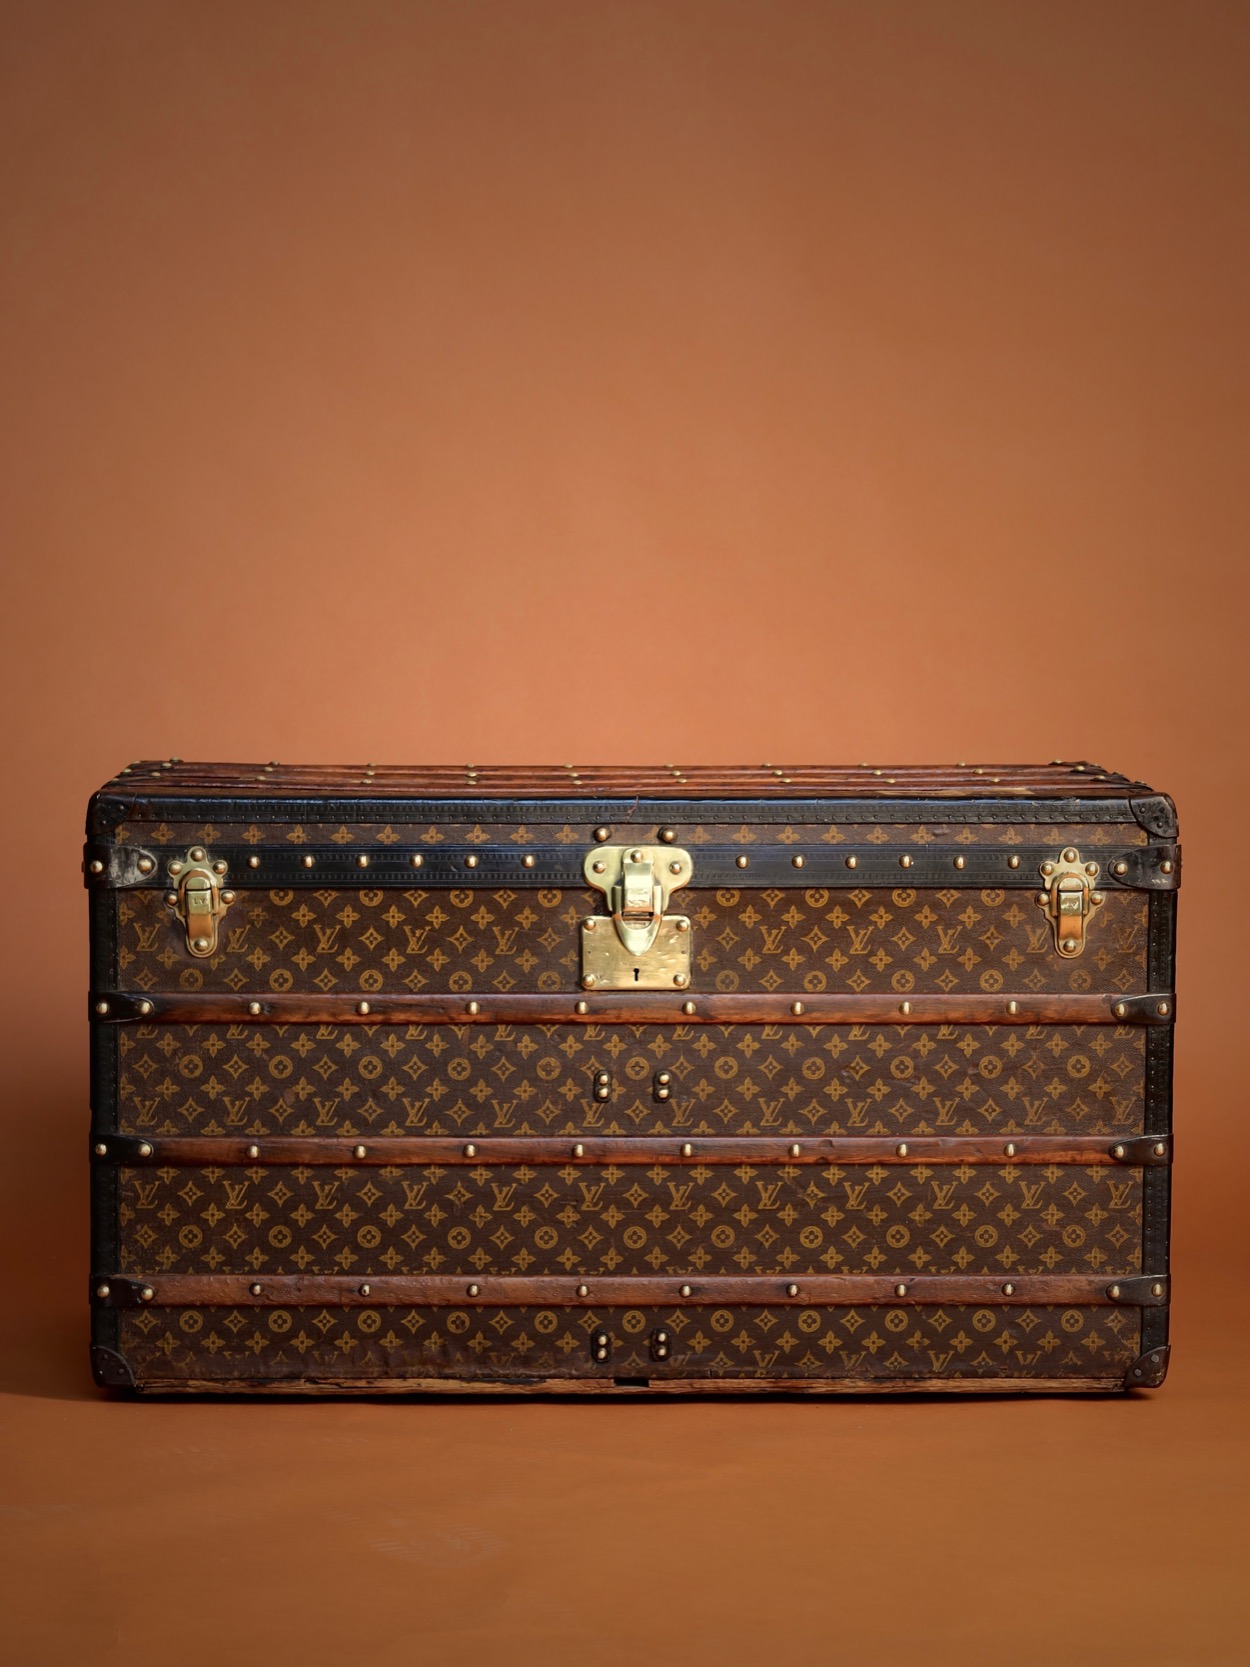 the-well-traveled-trunk-louis-vuitton-thumbnail-product-5749-1